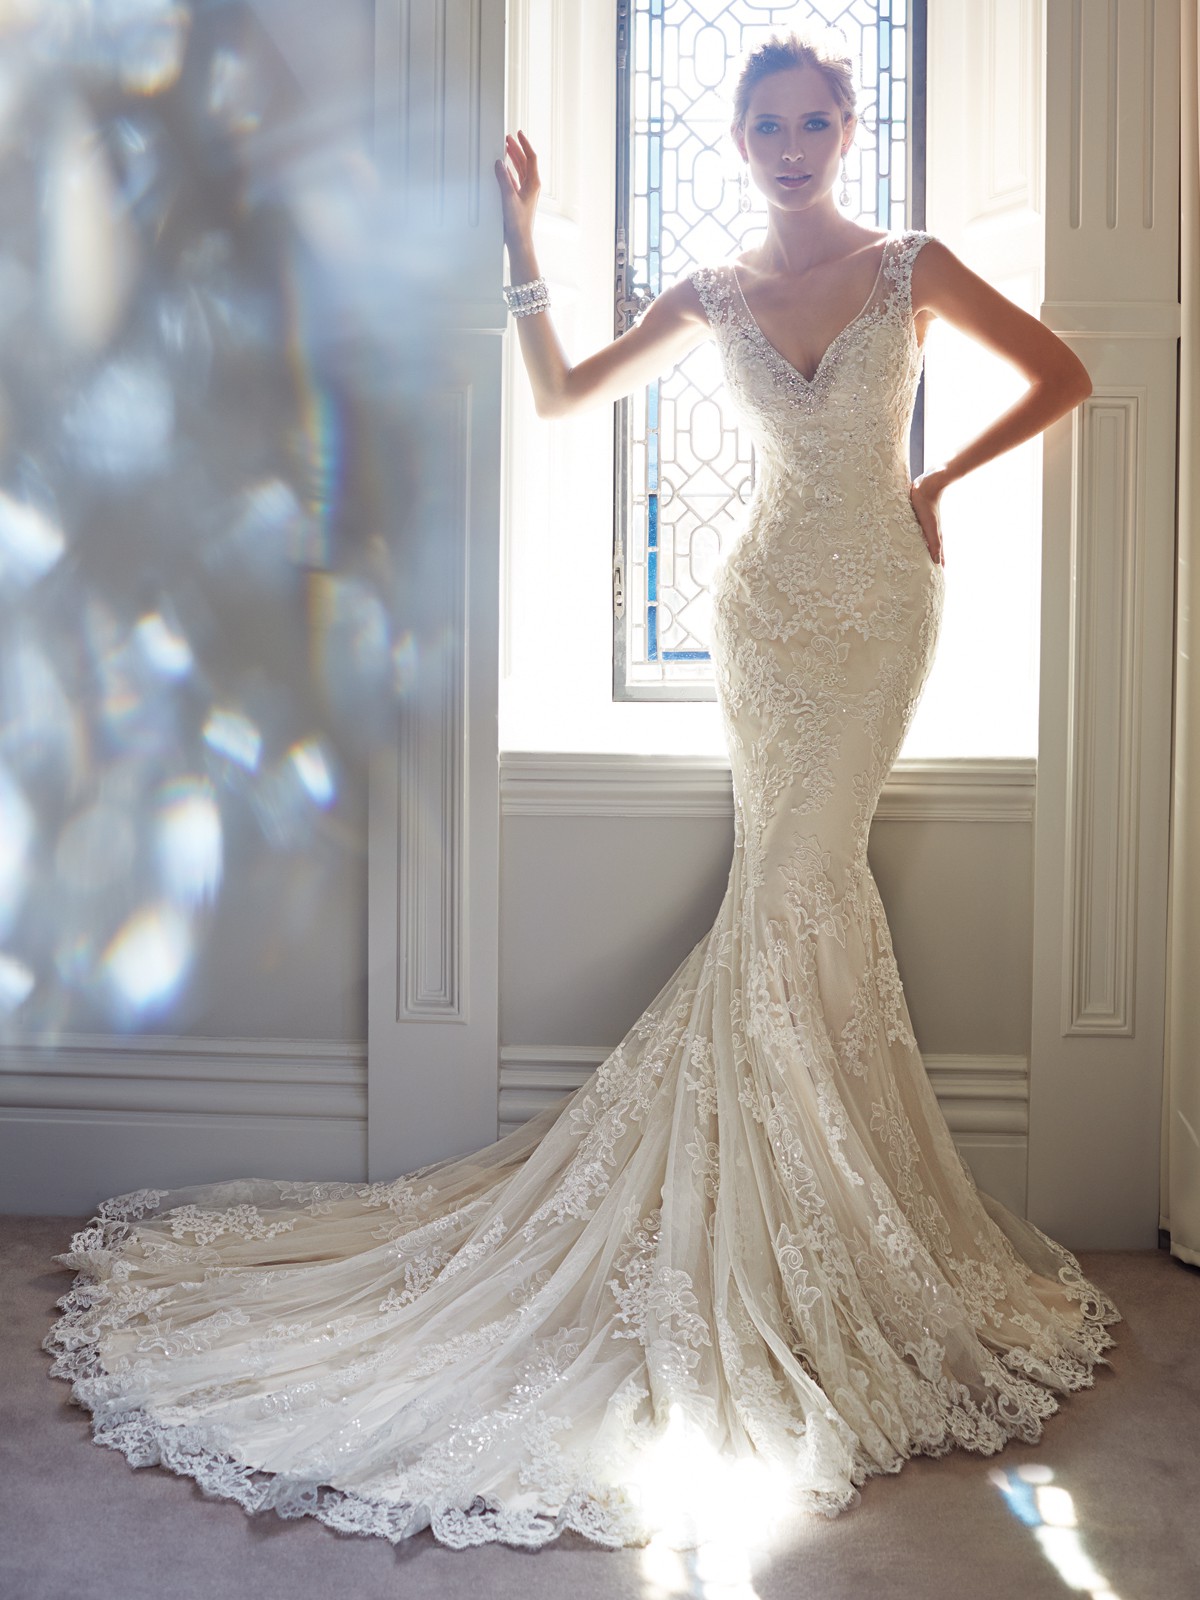 Sexy Mermaid Wedding Dress With Sheer Bodice And Glitter Tulle